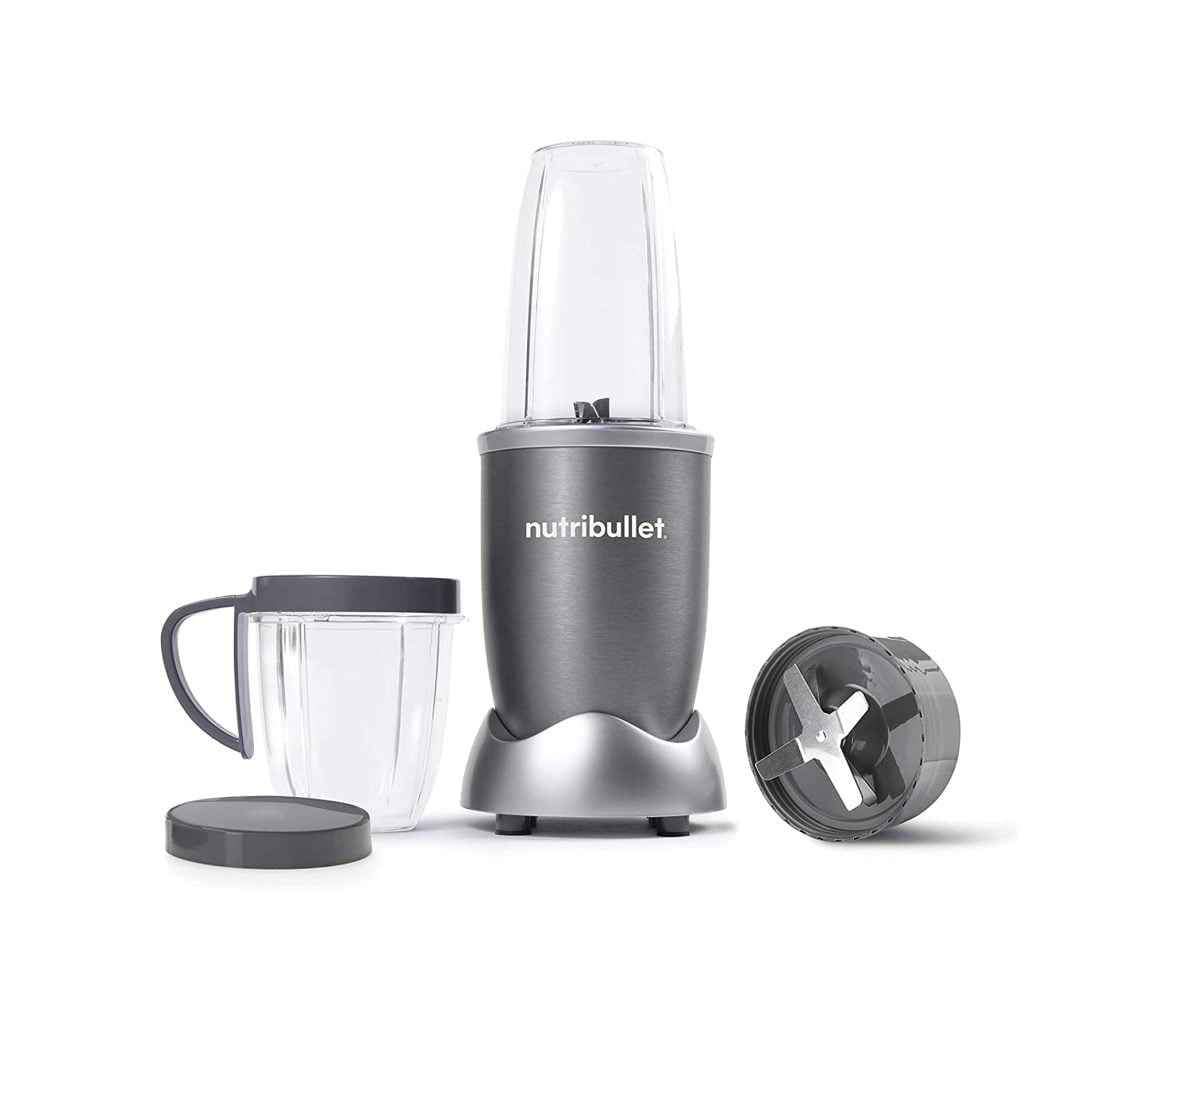 Nutribullet &Lt;Ul Class=&Quot;A-Unordered-List A-Vertical A-Spacing-Mini&Quot;&Gt; &Lt;Li&Gt;&Lt;Span Class=&Quot;A-List-Item&Quot;&Gt;Meet The Most Popular Nutribullet, Our Compact-Yet-Powerful Personal Blender. You Choose What Goes In To Get The Most Out Of Every Ingredient, Every Day.&Lt;/Span&Gt;&Lt;/Li&Gt; &Lt;Li&Gt;&Lt;Span Class=&Quot;A-List-Item&Quot;&Gt;The Nutribullet Is The Fastest, Easiest Solution For Making Nutrient-Packed Smoothies. Load It Up With Your Favorite Whole Foods Like Nuts, Berries, And Spinach, Then Push, Twist, And Blend Your Way To A Healthier Lifestyle.&Lt;/Span&Gt;&Lt;/Li&Gt; &Lt;Li&Gt;&Lt;Span Class=&Quot;A-List-Item&Quot;&Gt;Powerful 600-Watt Motor And Refined Nutrient-Extraction Blades Blend Whole Foods Into Liquid Fuel For Your Body - In Seconds.&Lt;/Span&Gt;&Lt;/Li&Gt; &Lt;Li&Gt;&Lt;Span Class=&Quot;A-List-Item&Quot;&Gt;Hassle-Free Cleaning - Simply Twist Off The Blade, Rinse With Soap And Water, And Put The Cups In The Top Rack Of The Dishwasher.&Lt;/Span&Gt;&Lt;/Li&Gt; &Lt;Li&Gt;&Lt;Span Class=&Quot;A-List-Item&Quot;&Gt;What You Get: (1) 600 Watt Motor Base, (1) Extractor Blade, (1) 700Ml Cup, (1) 500Ml Cup, (1) Lip Ring With Handle, (1) Solid Lid, (1) User Guide, (1) Recipe Book. 2 Years Brand Warranty&Lt;/Span&Gt;&Lt;/Li&Gt; &Lt;/Ul&Gt; Nutribullet Nutribullet 600 Watts, 8 Piece Set, Multi-Function High Speed Blender, Mixer System With Nutrient Extractor, Smoothie Maker, Gray